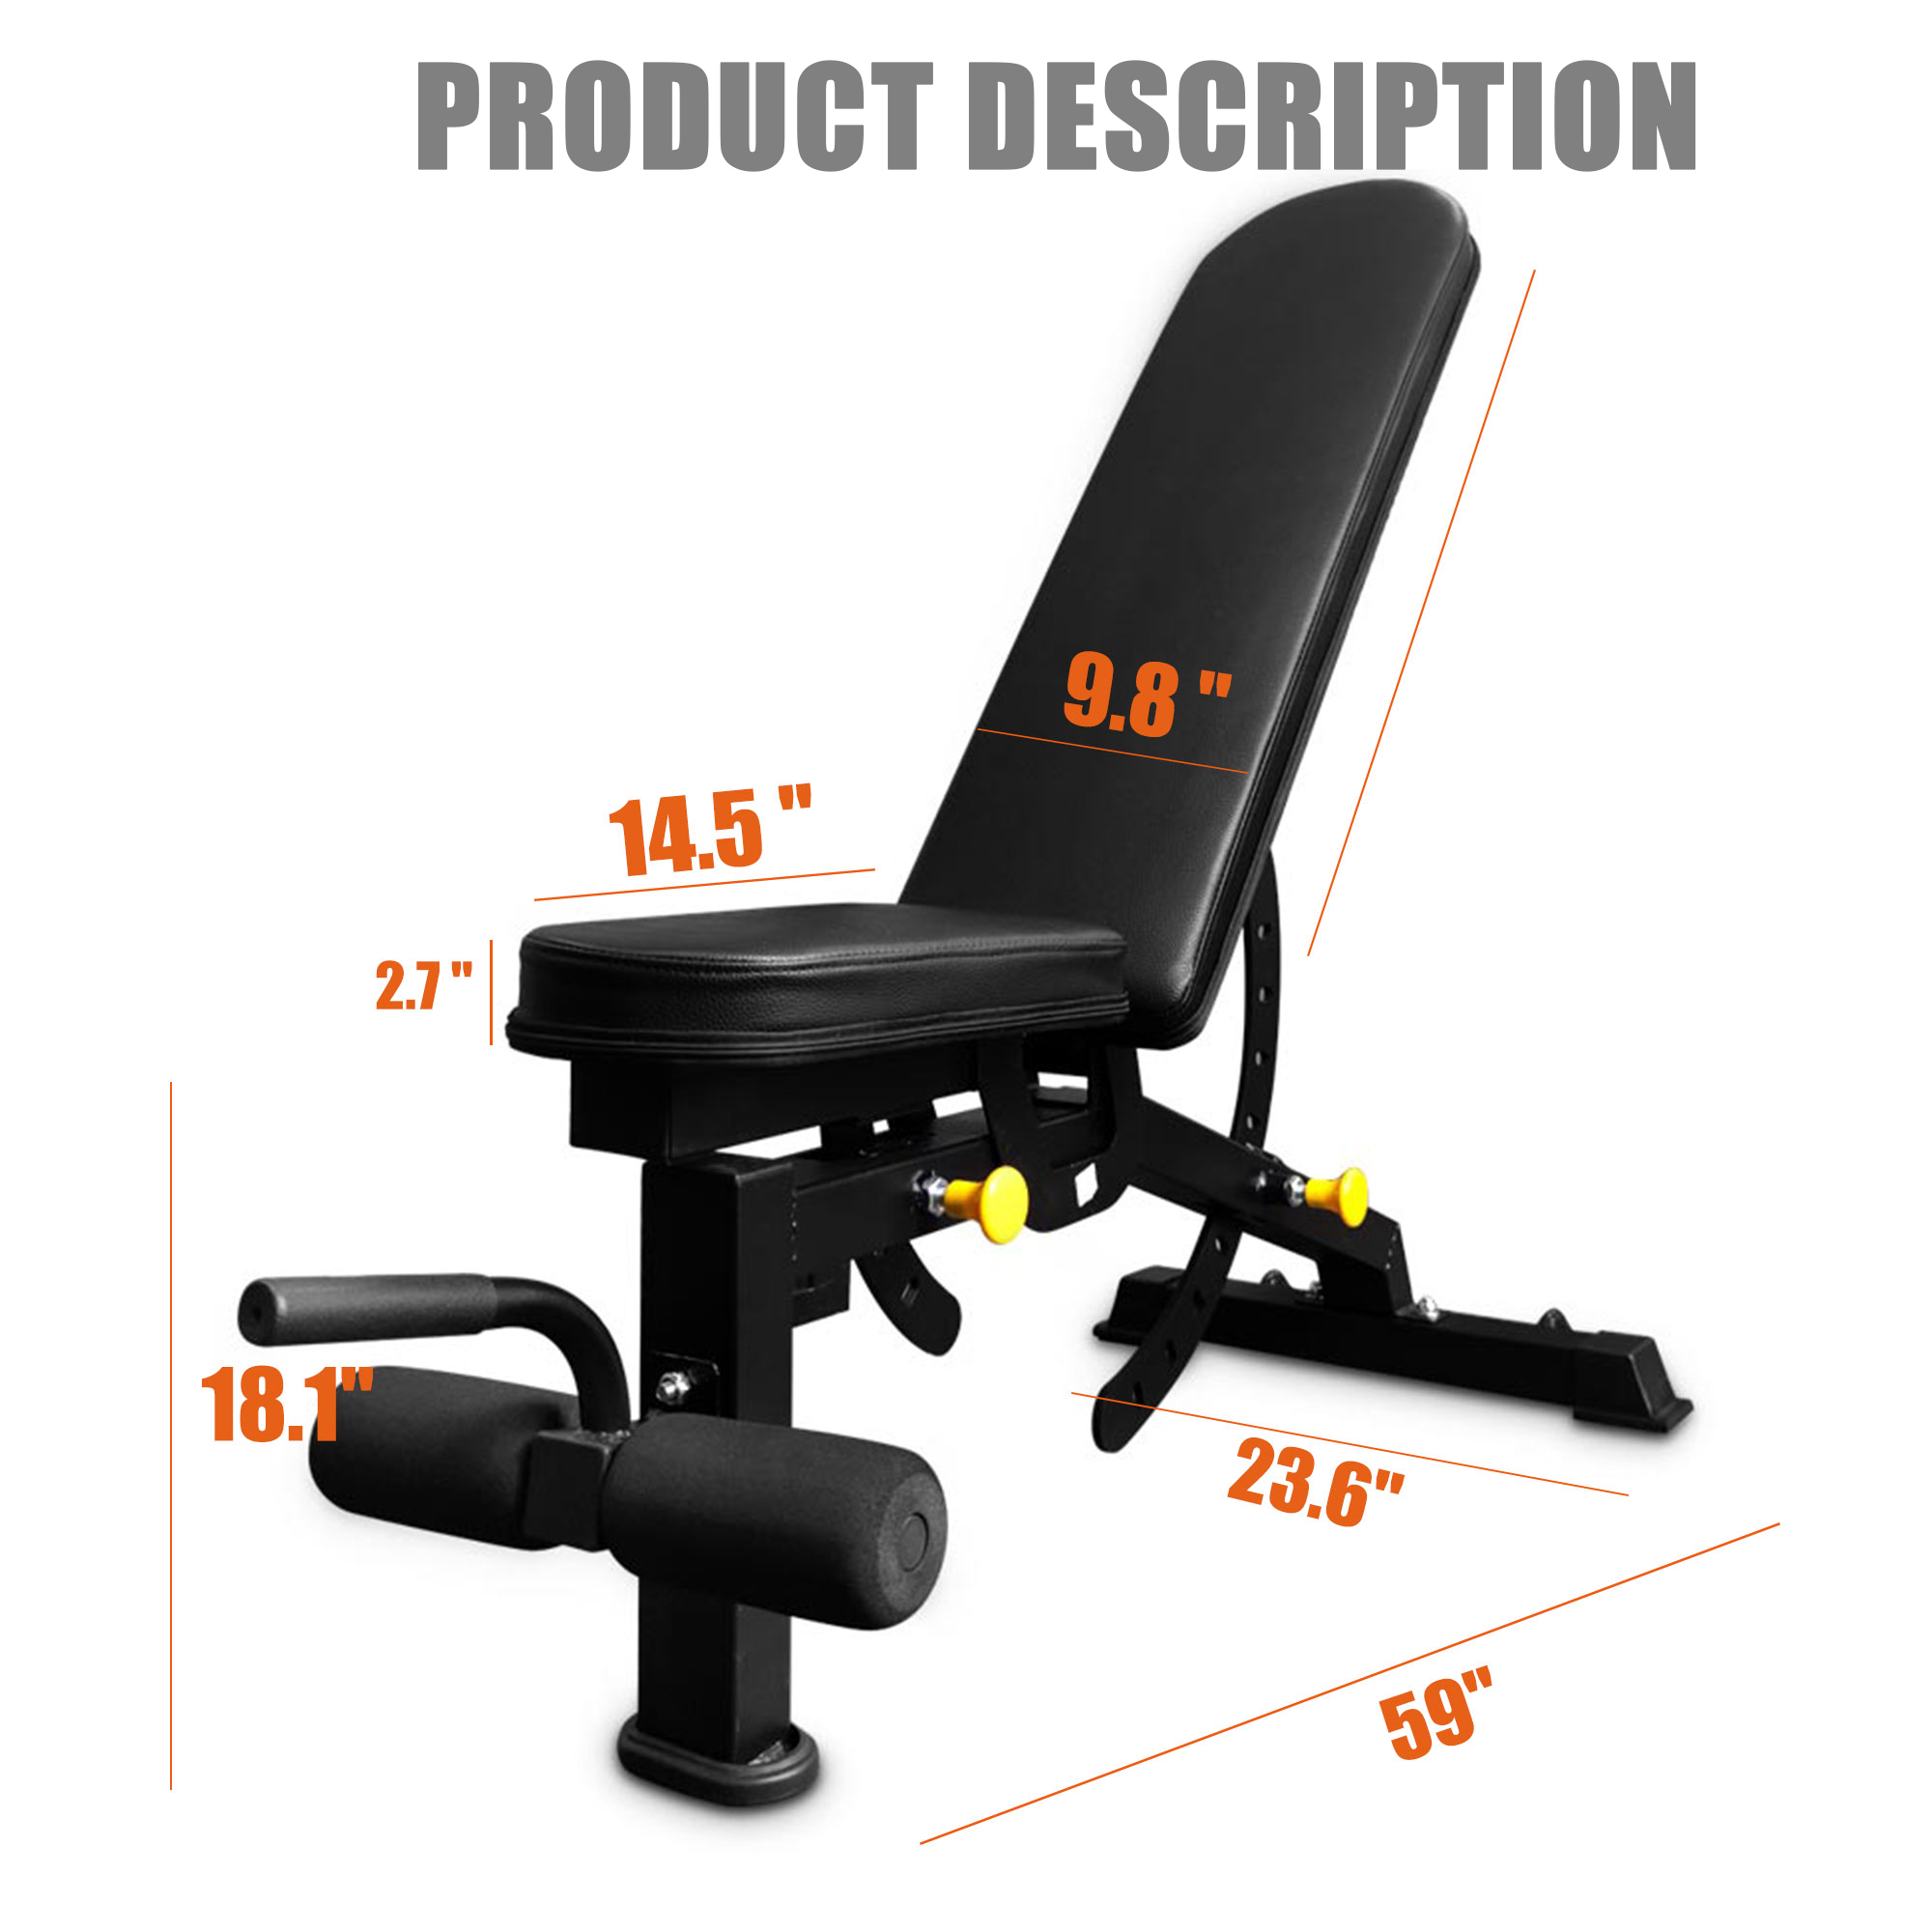 IFAST weight bench size